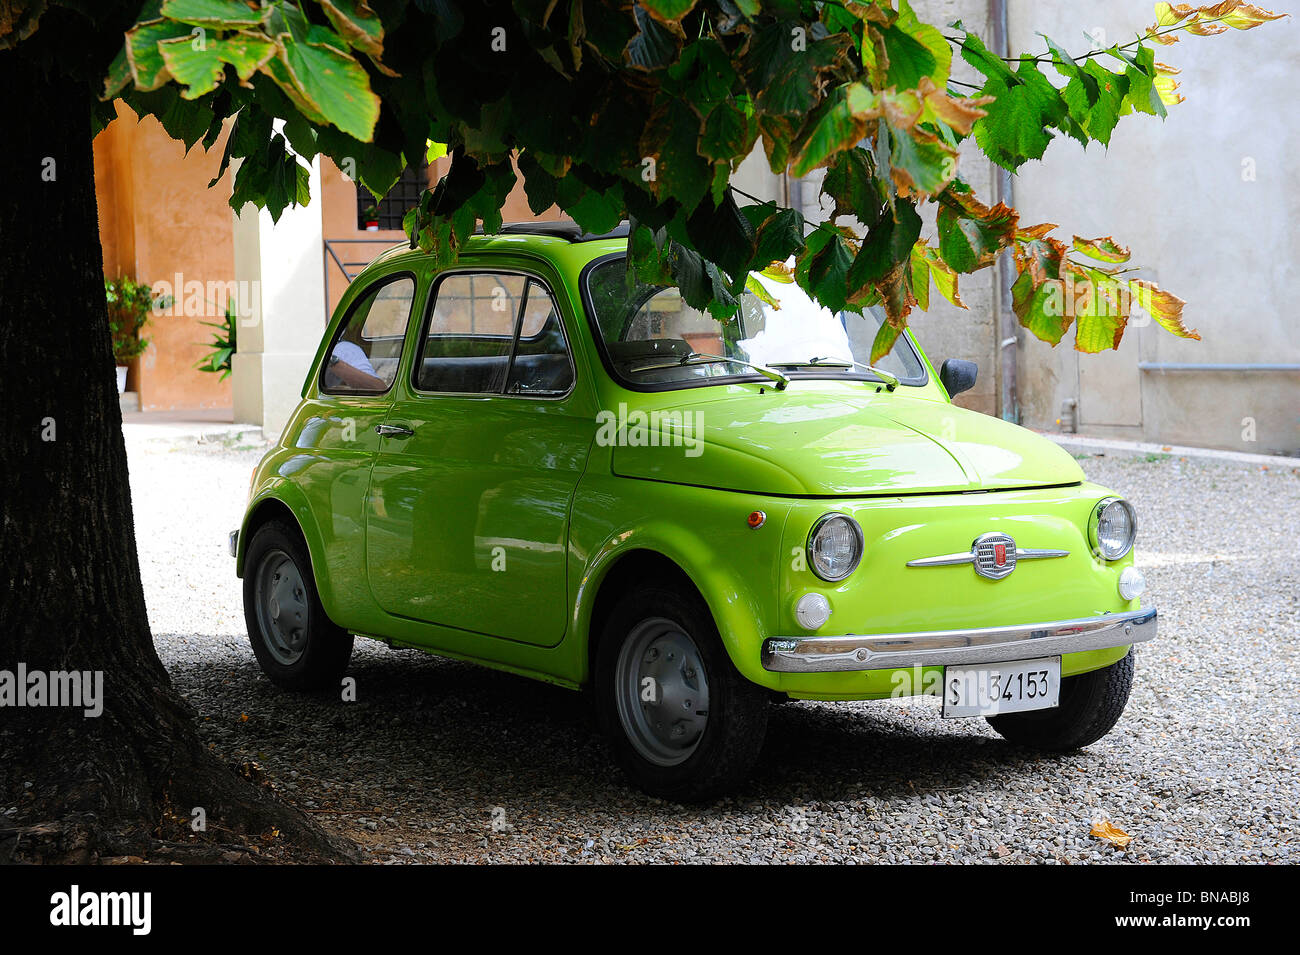 oldtimer Fiat 500 under a tree seen in Italy Stock Photo